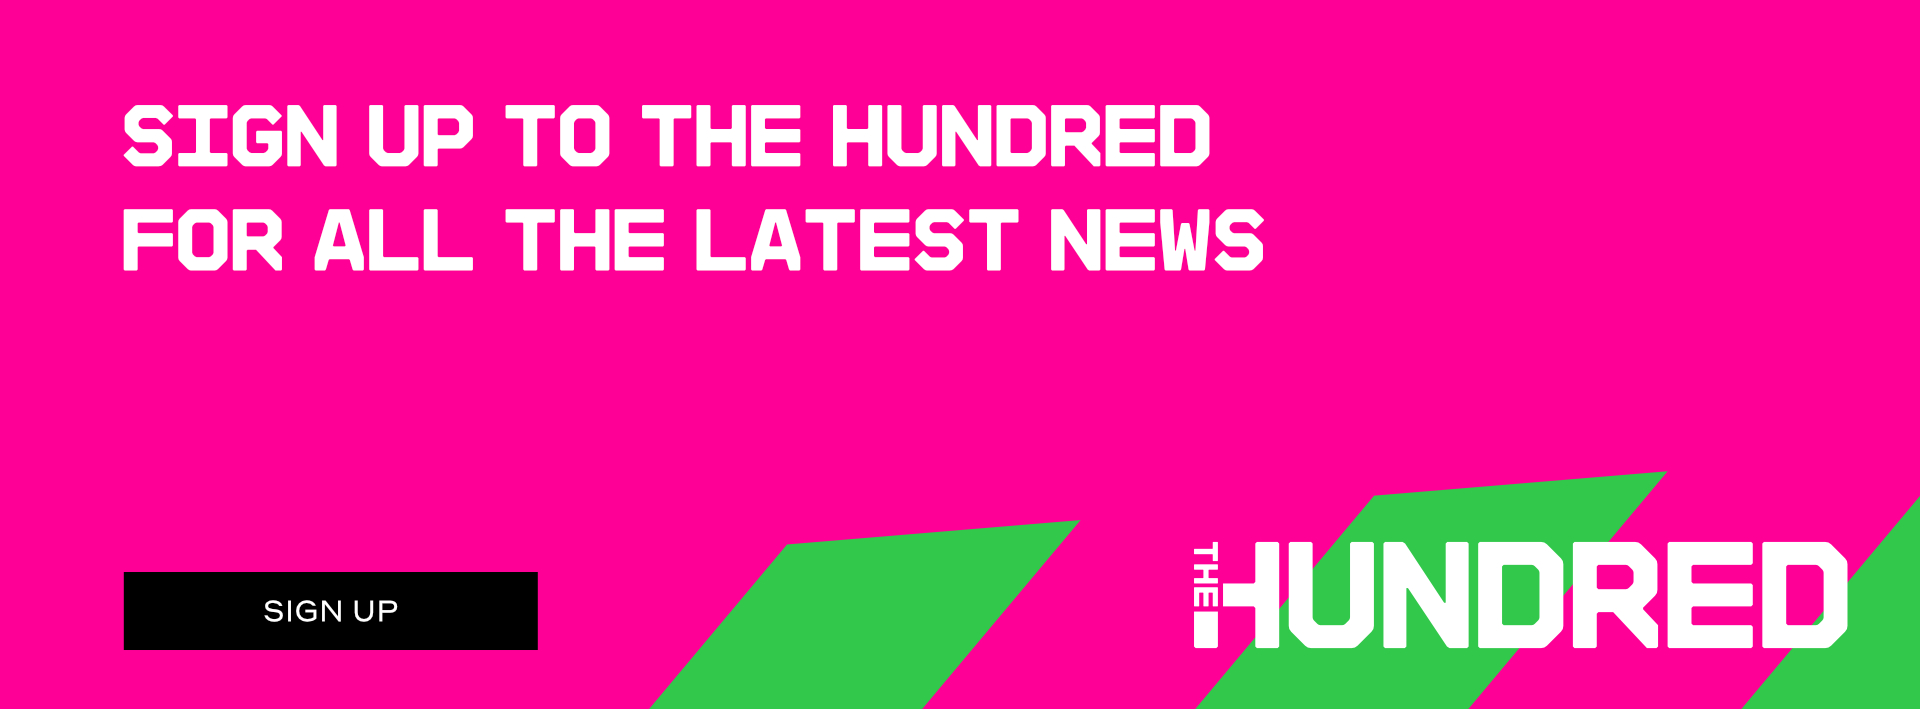 Sign up to the Hundred for all the latest news